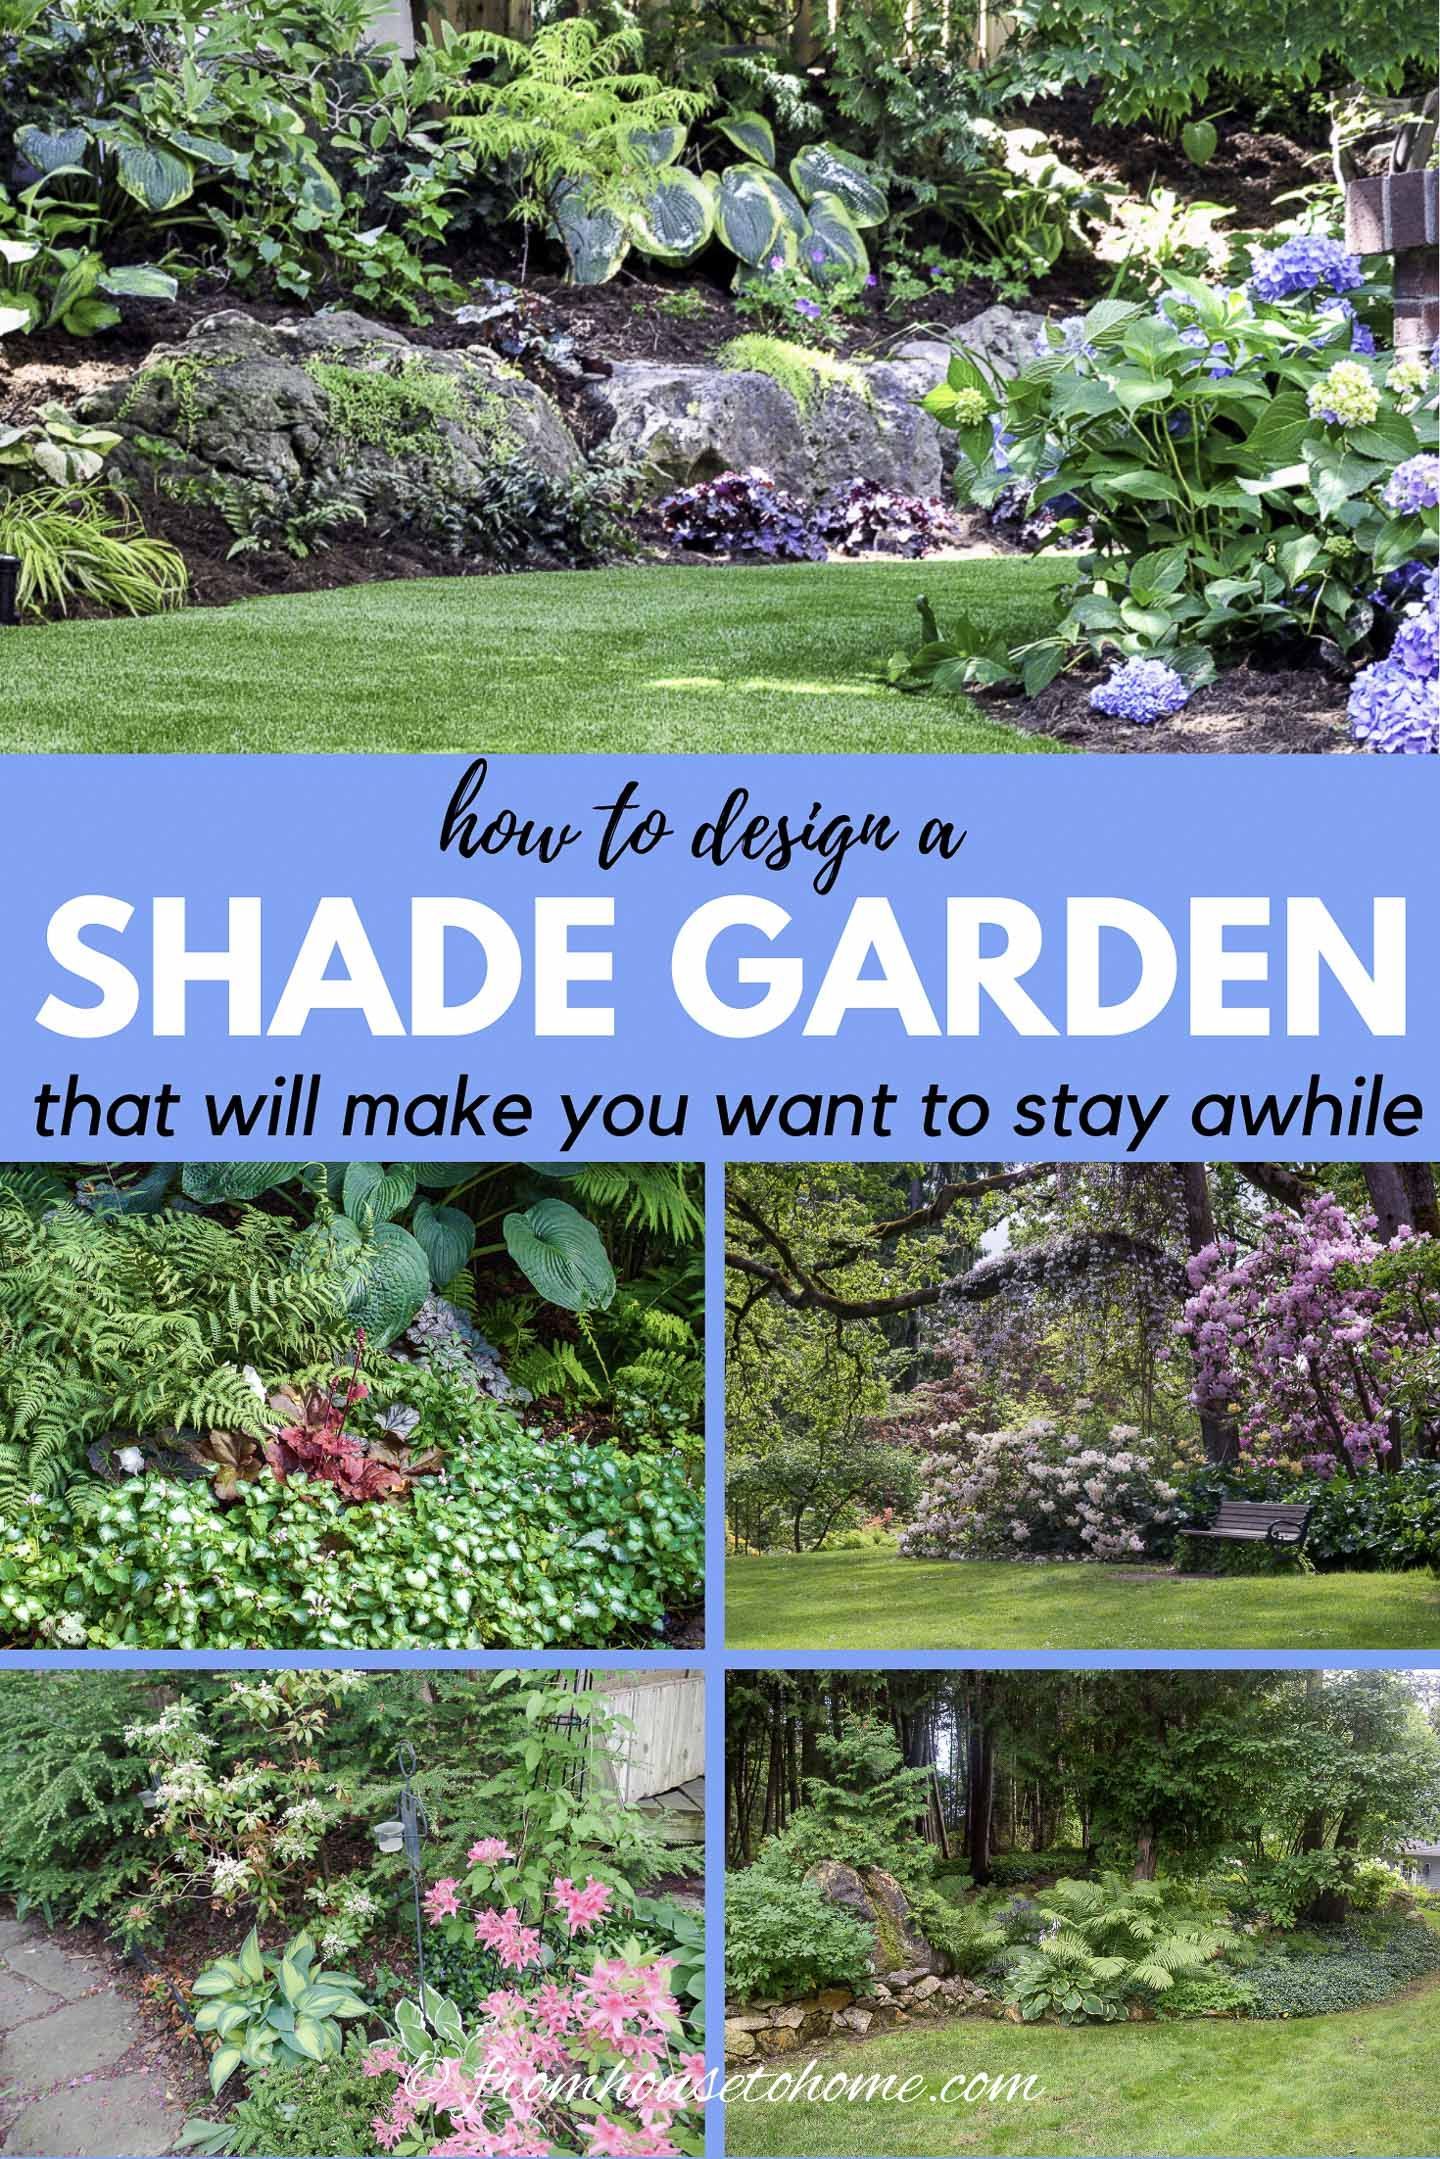 How To Design A Stunning Shade Garden (With Pictures) - Gardening @ From House To Home -   16 garden design Inspiration building ideas